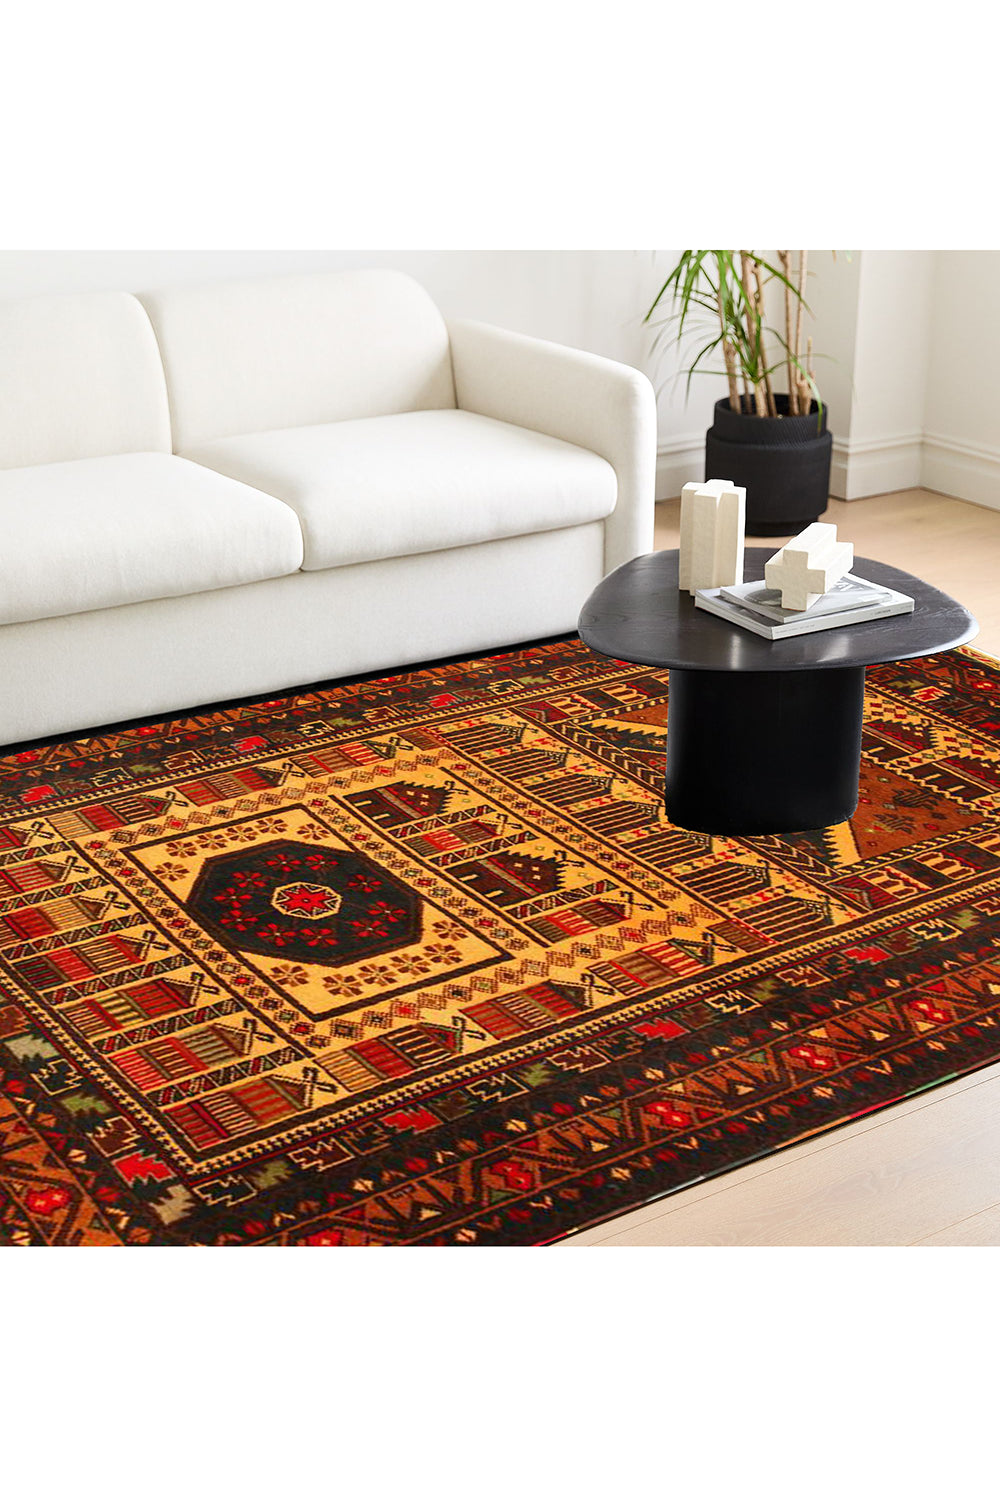 Baluch Hand Knotted Wool Rug 140x90